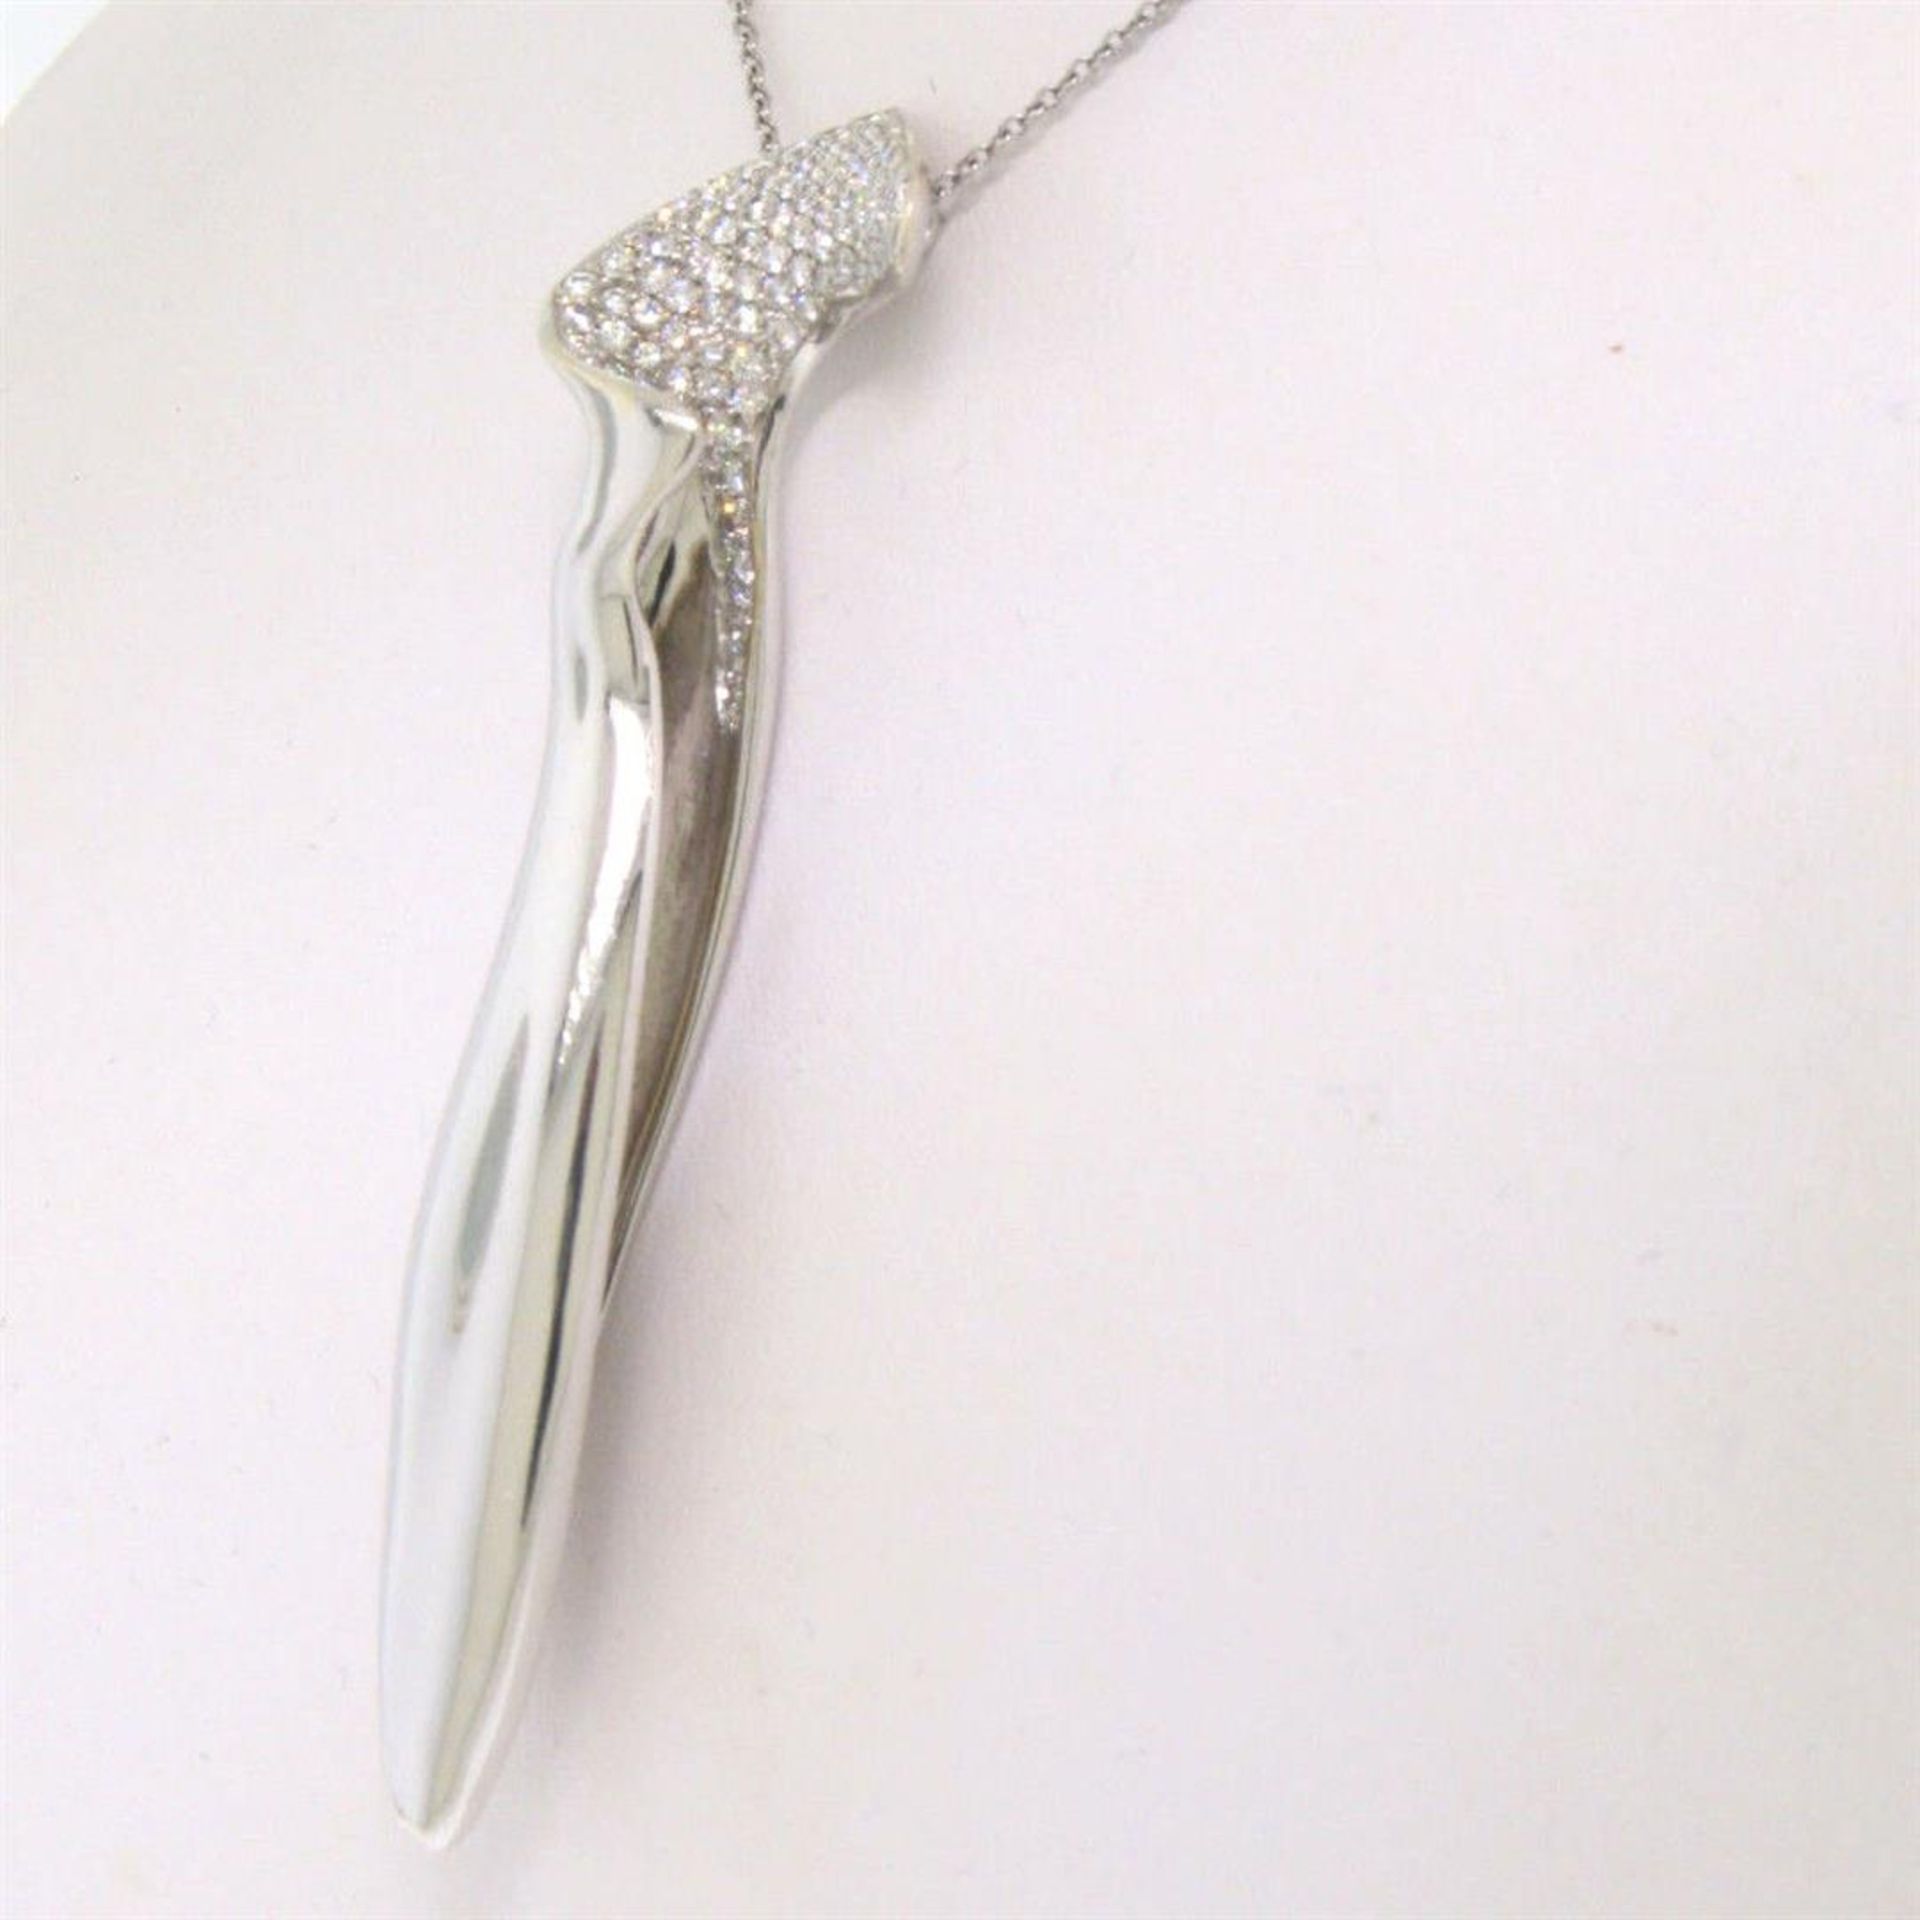 Tiffany & Co. Frank Gehry 16" 18k White Gold Orchid Diamond Pendant Necklace - Image 5 of 8